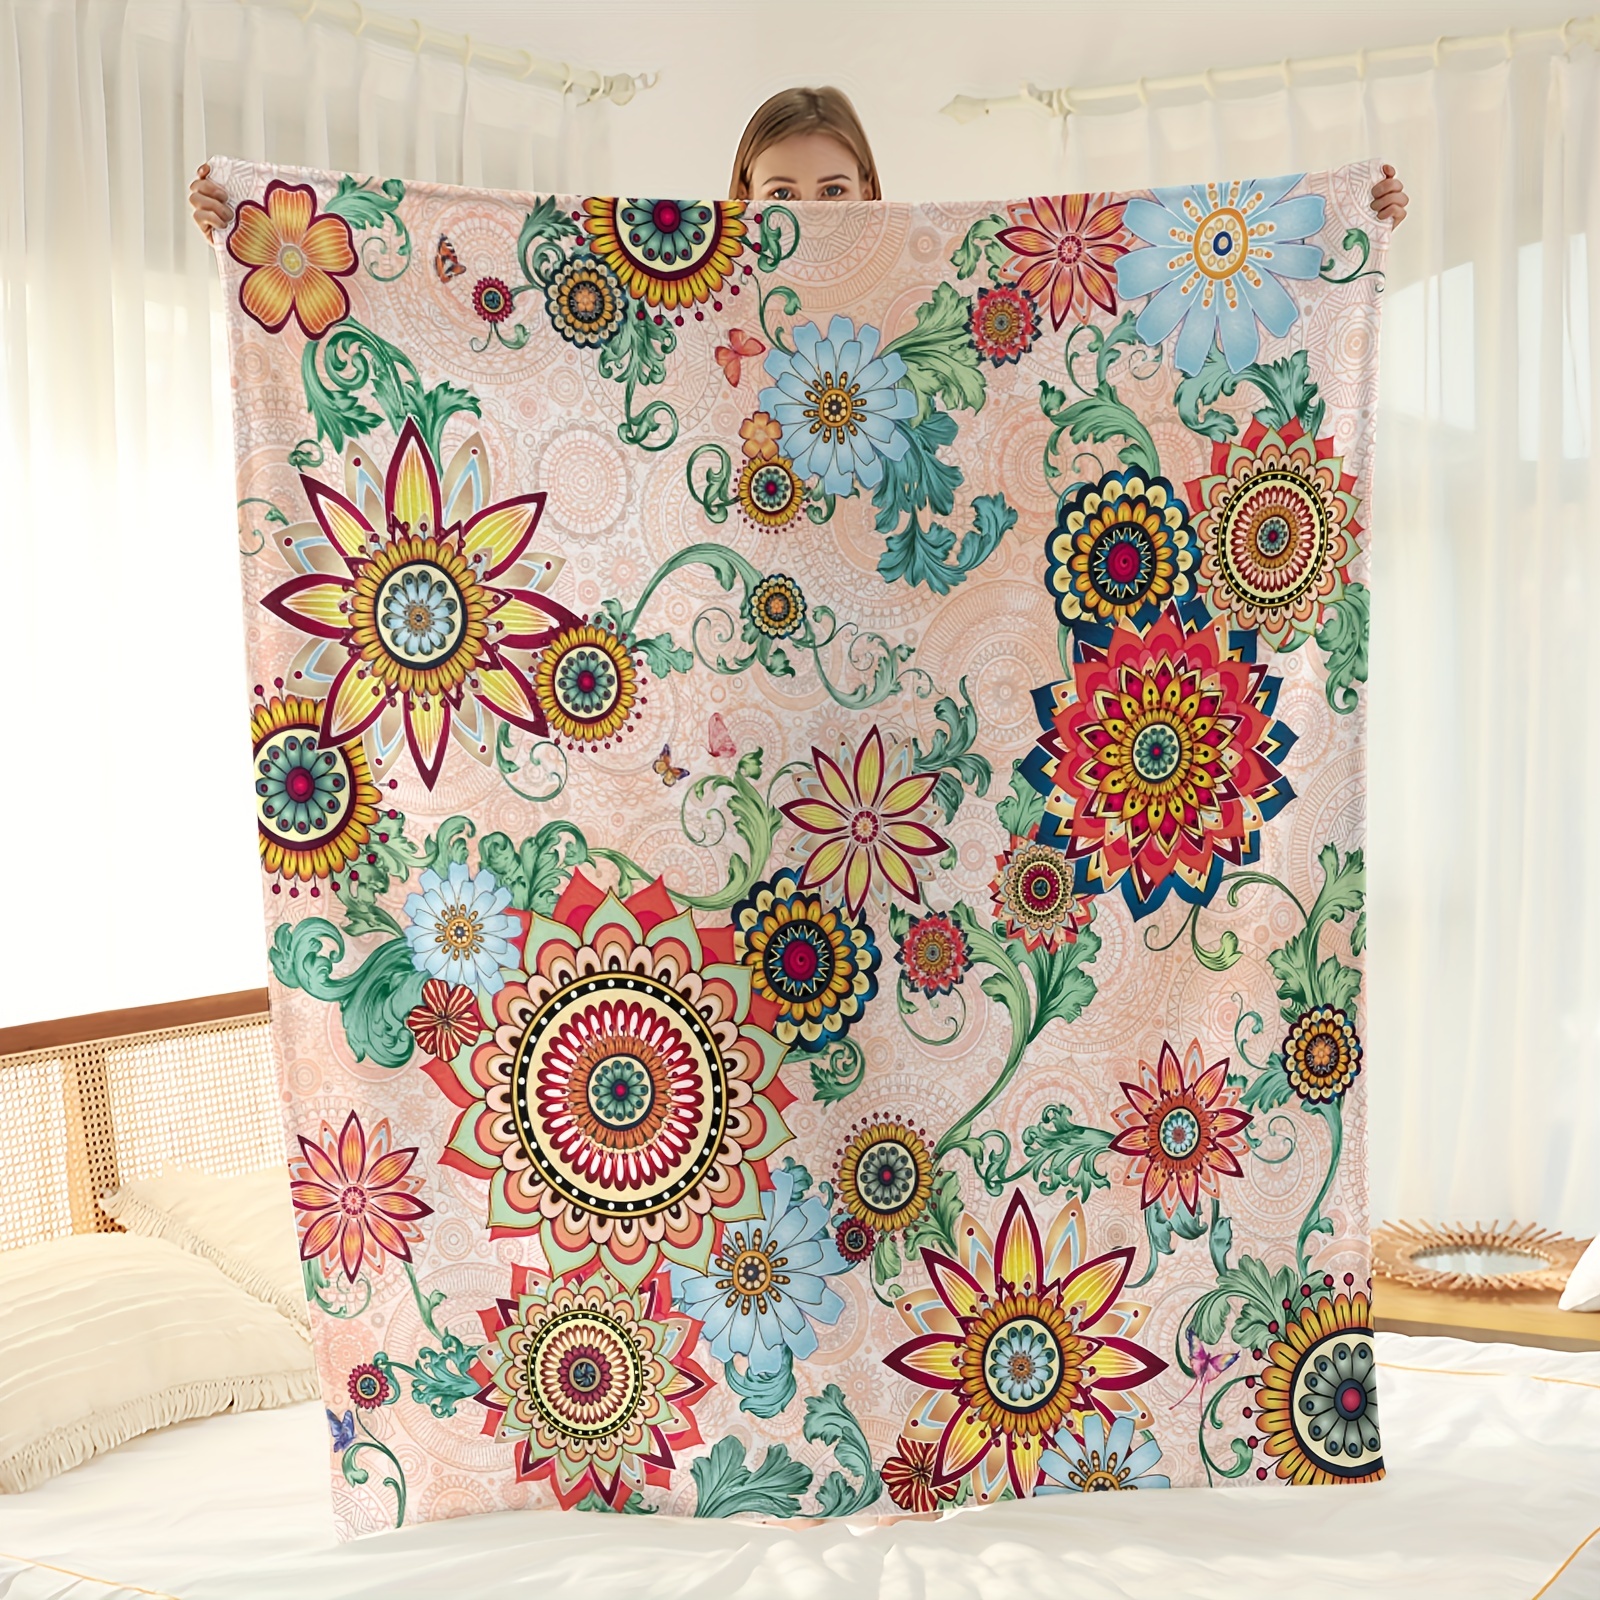 Boho Floral Flannel Blanket With Pillow Cover For Office, Bed